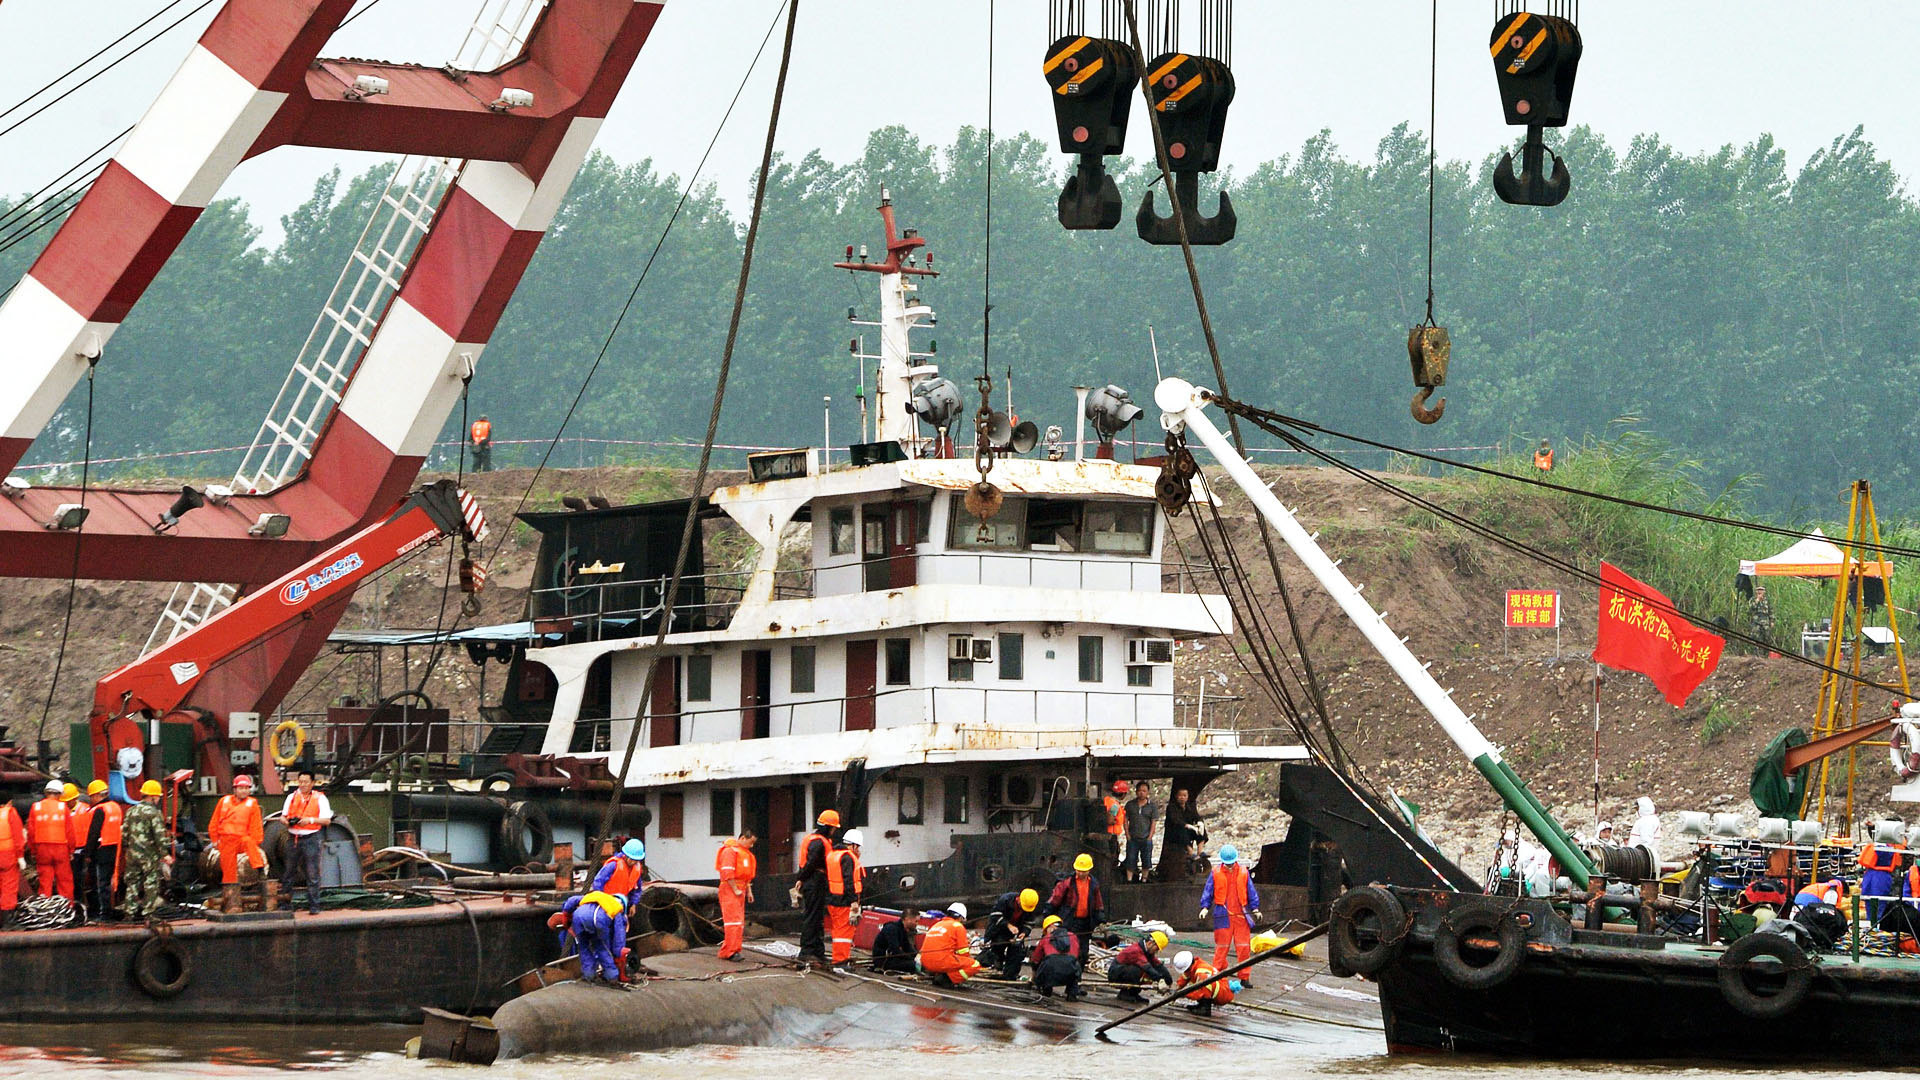 Rescuers continue search and rescue operations on a cruise ship that capsized in the Yangtze River in Jianli, Hubei. Photo: Kyodo